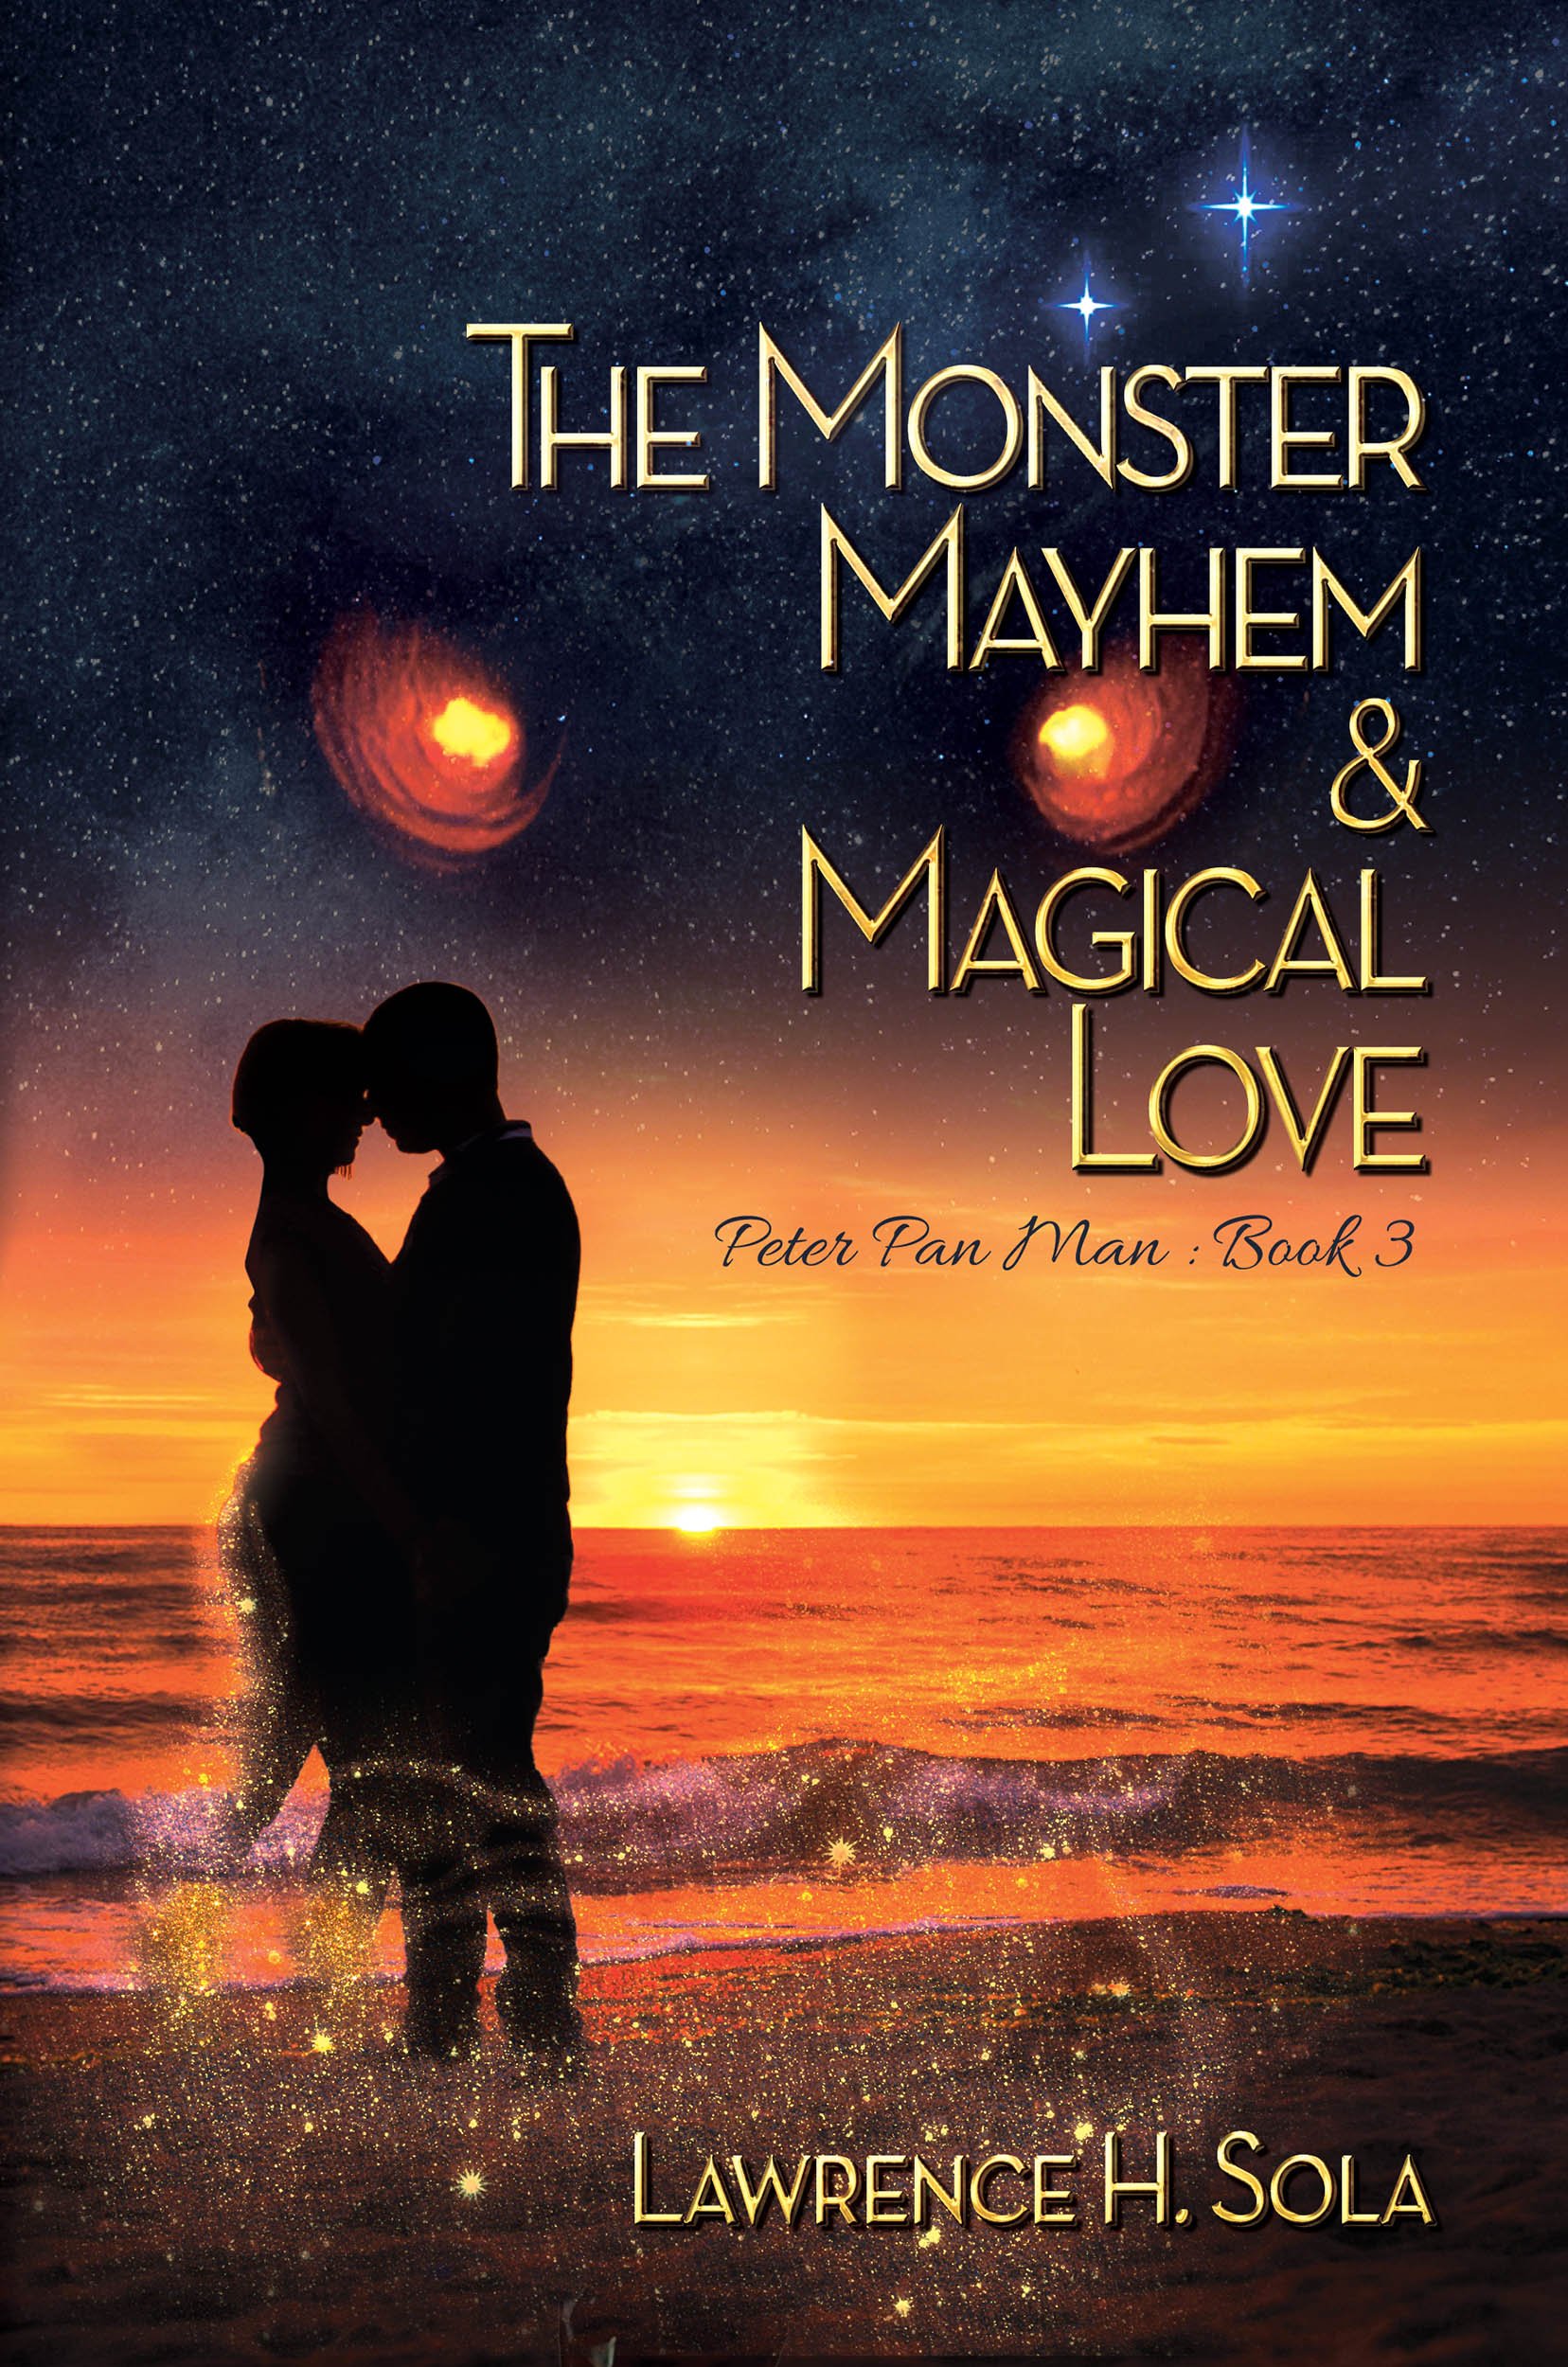 The Monster, Mayhem, and Magical Love hq nude pic